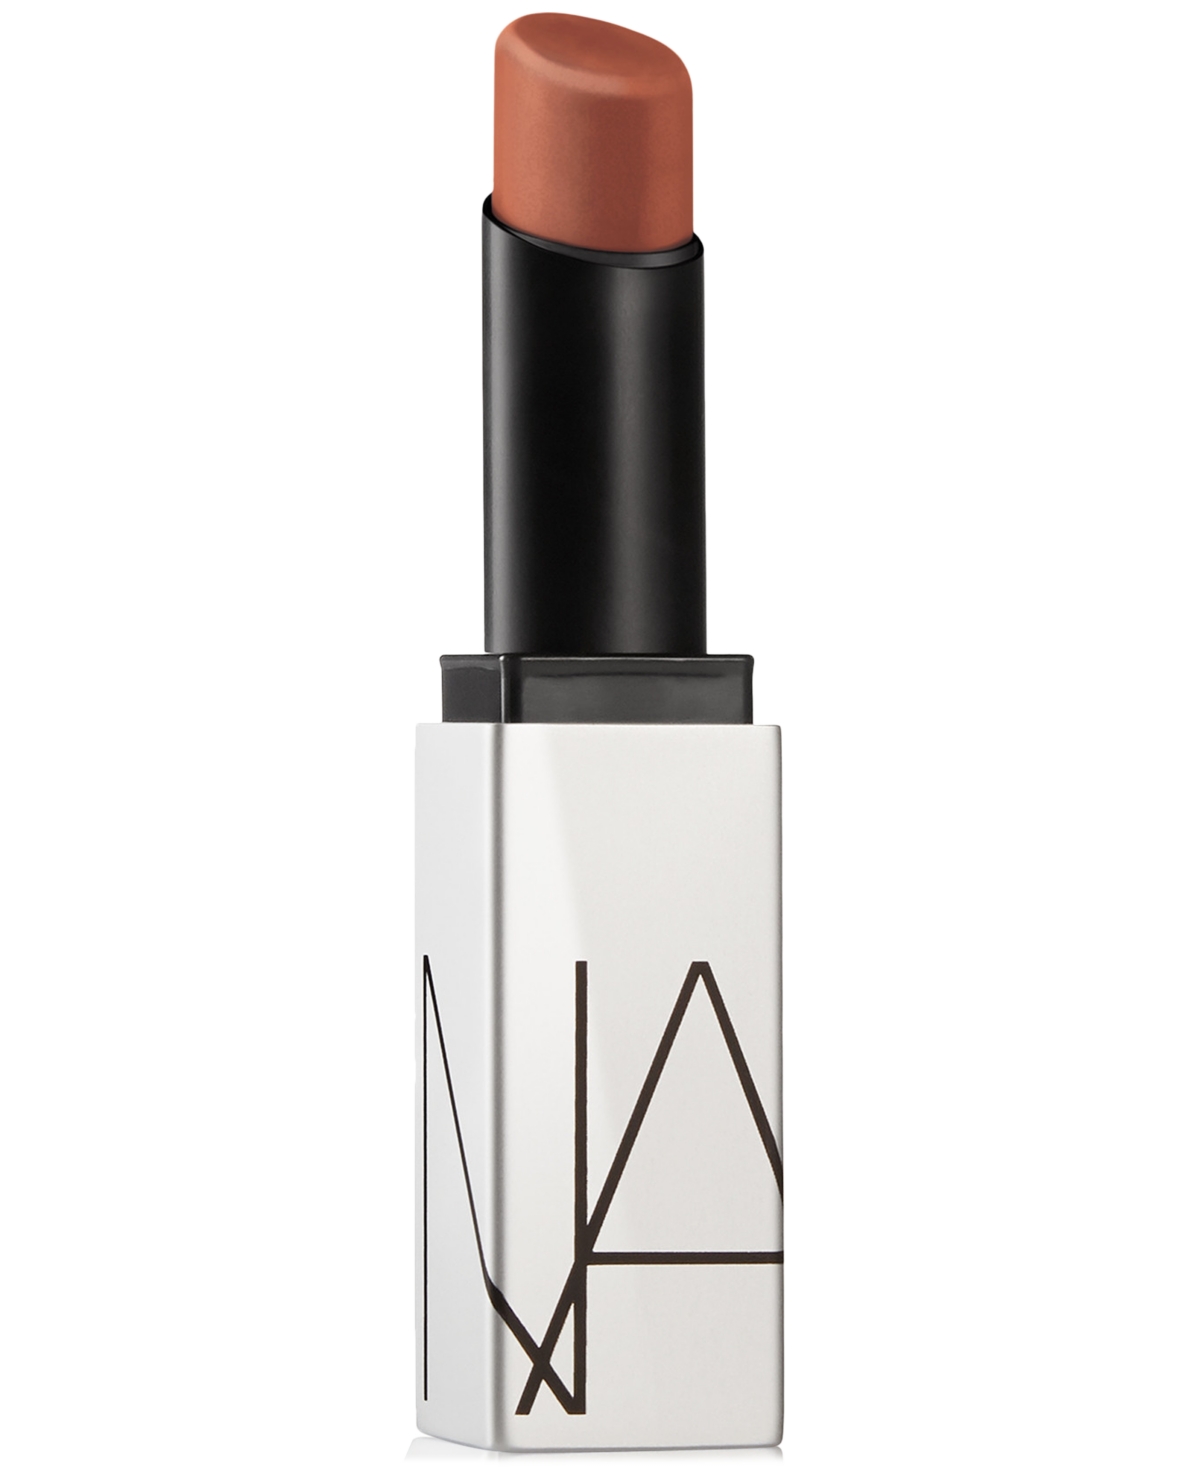 Nars Soft Matte Tinted Lip Balm In Whip Lash - Rusty Nude